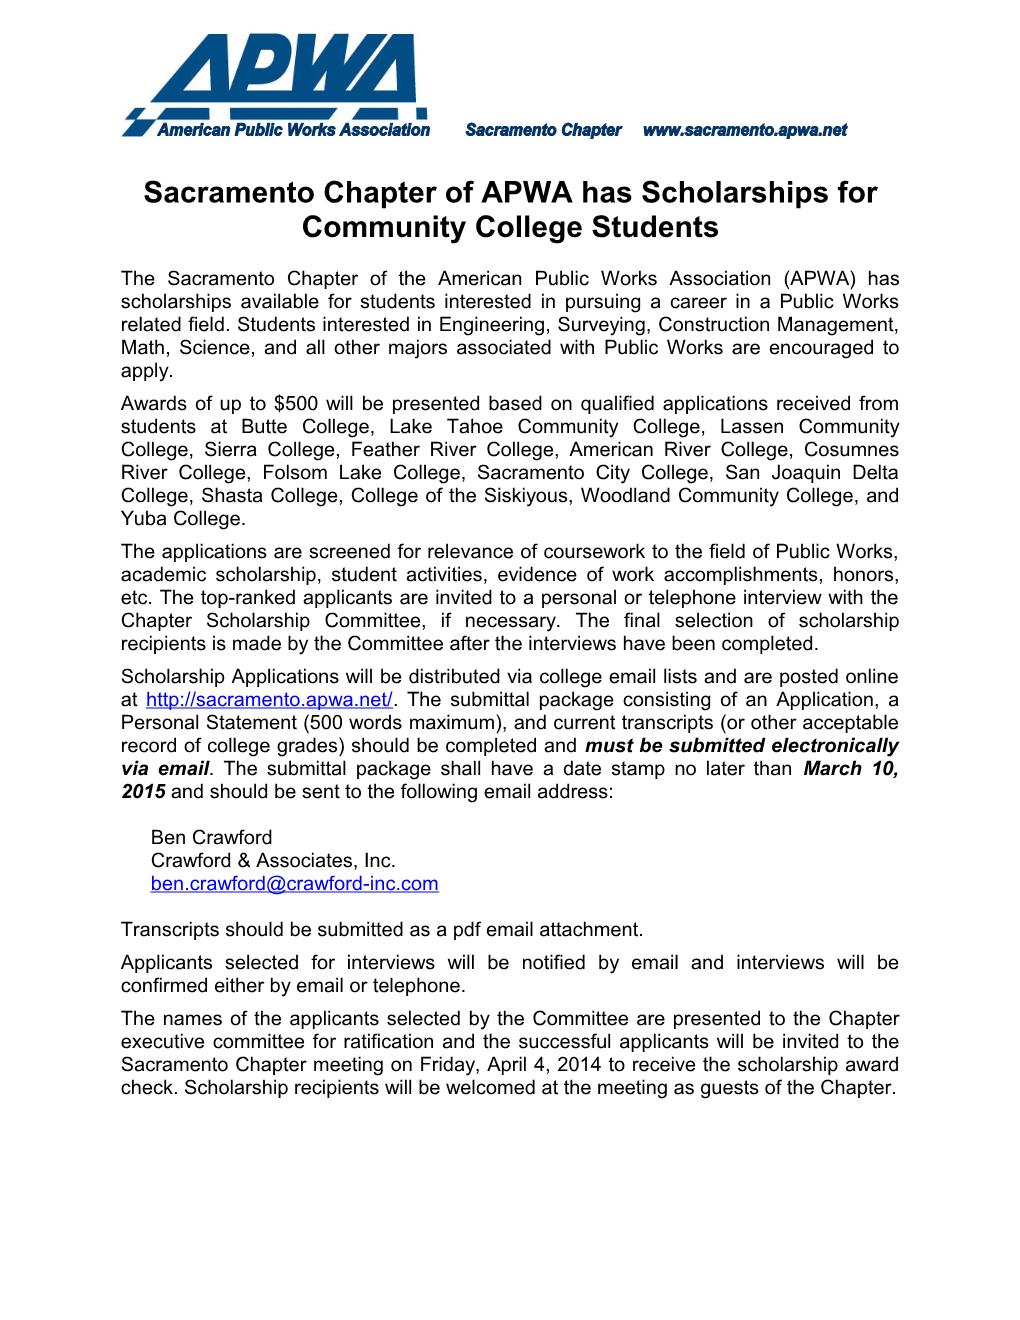 Sacramento Chapter of the American Public Works Association